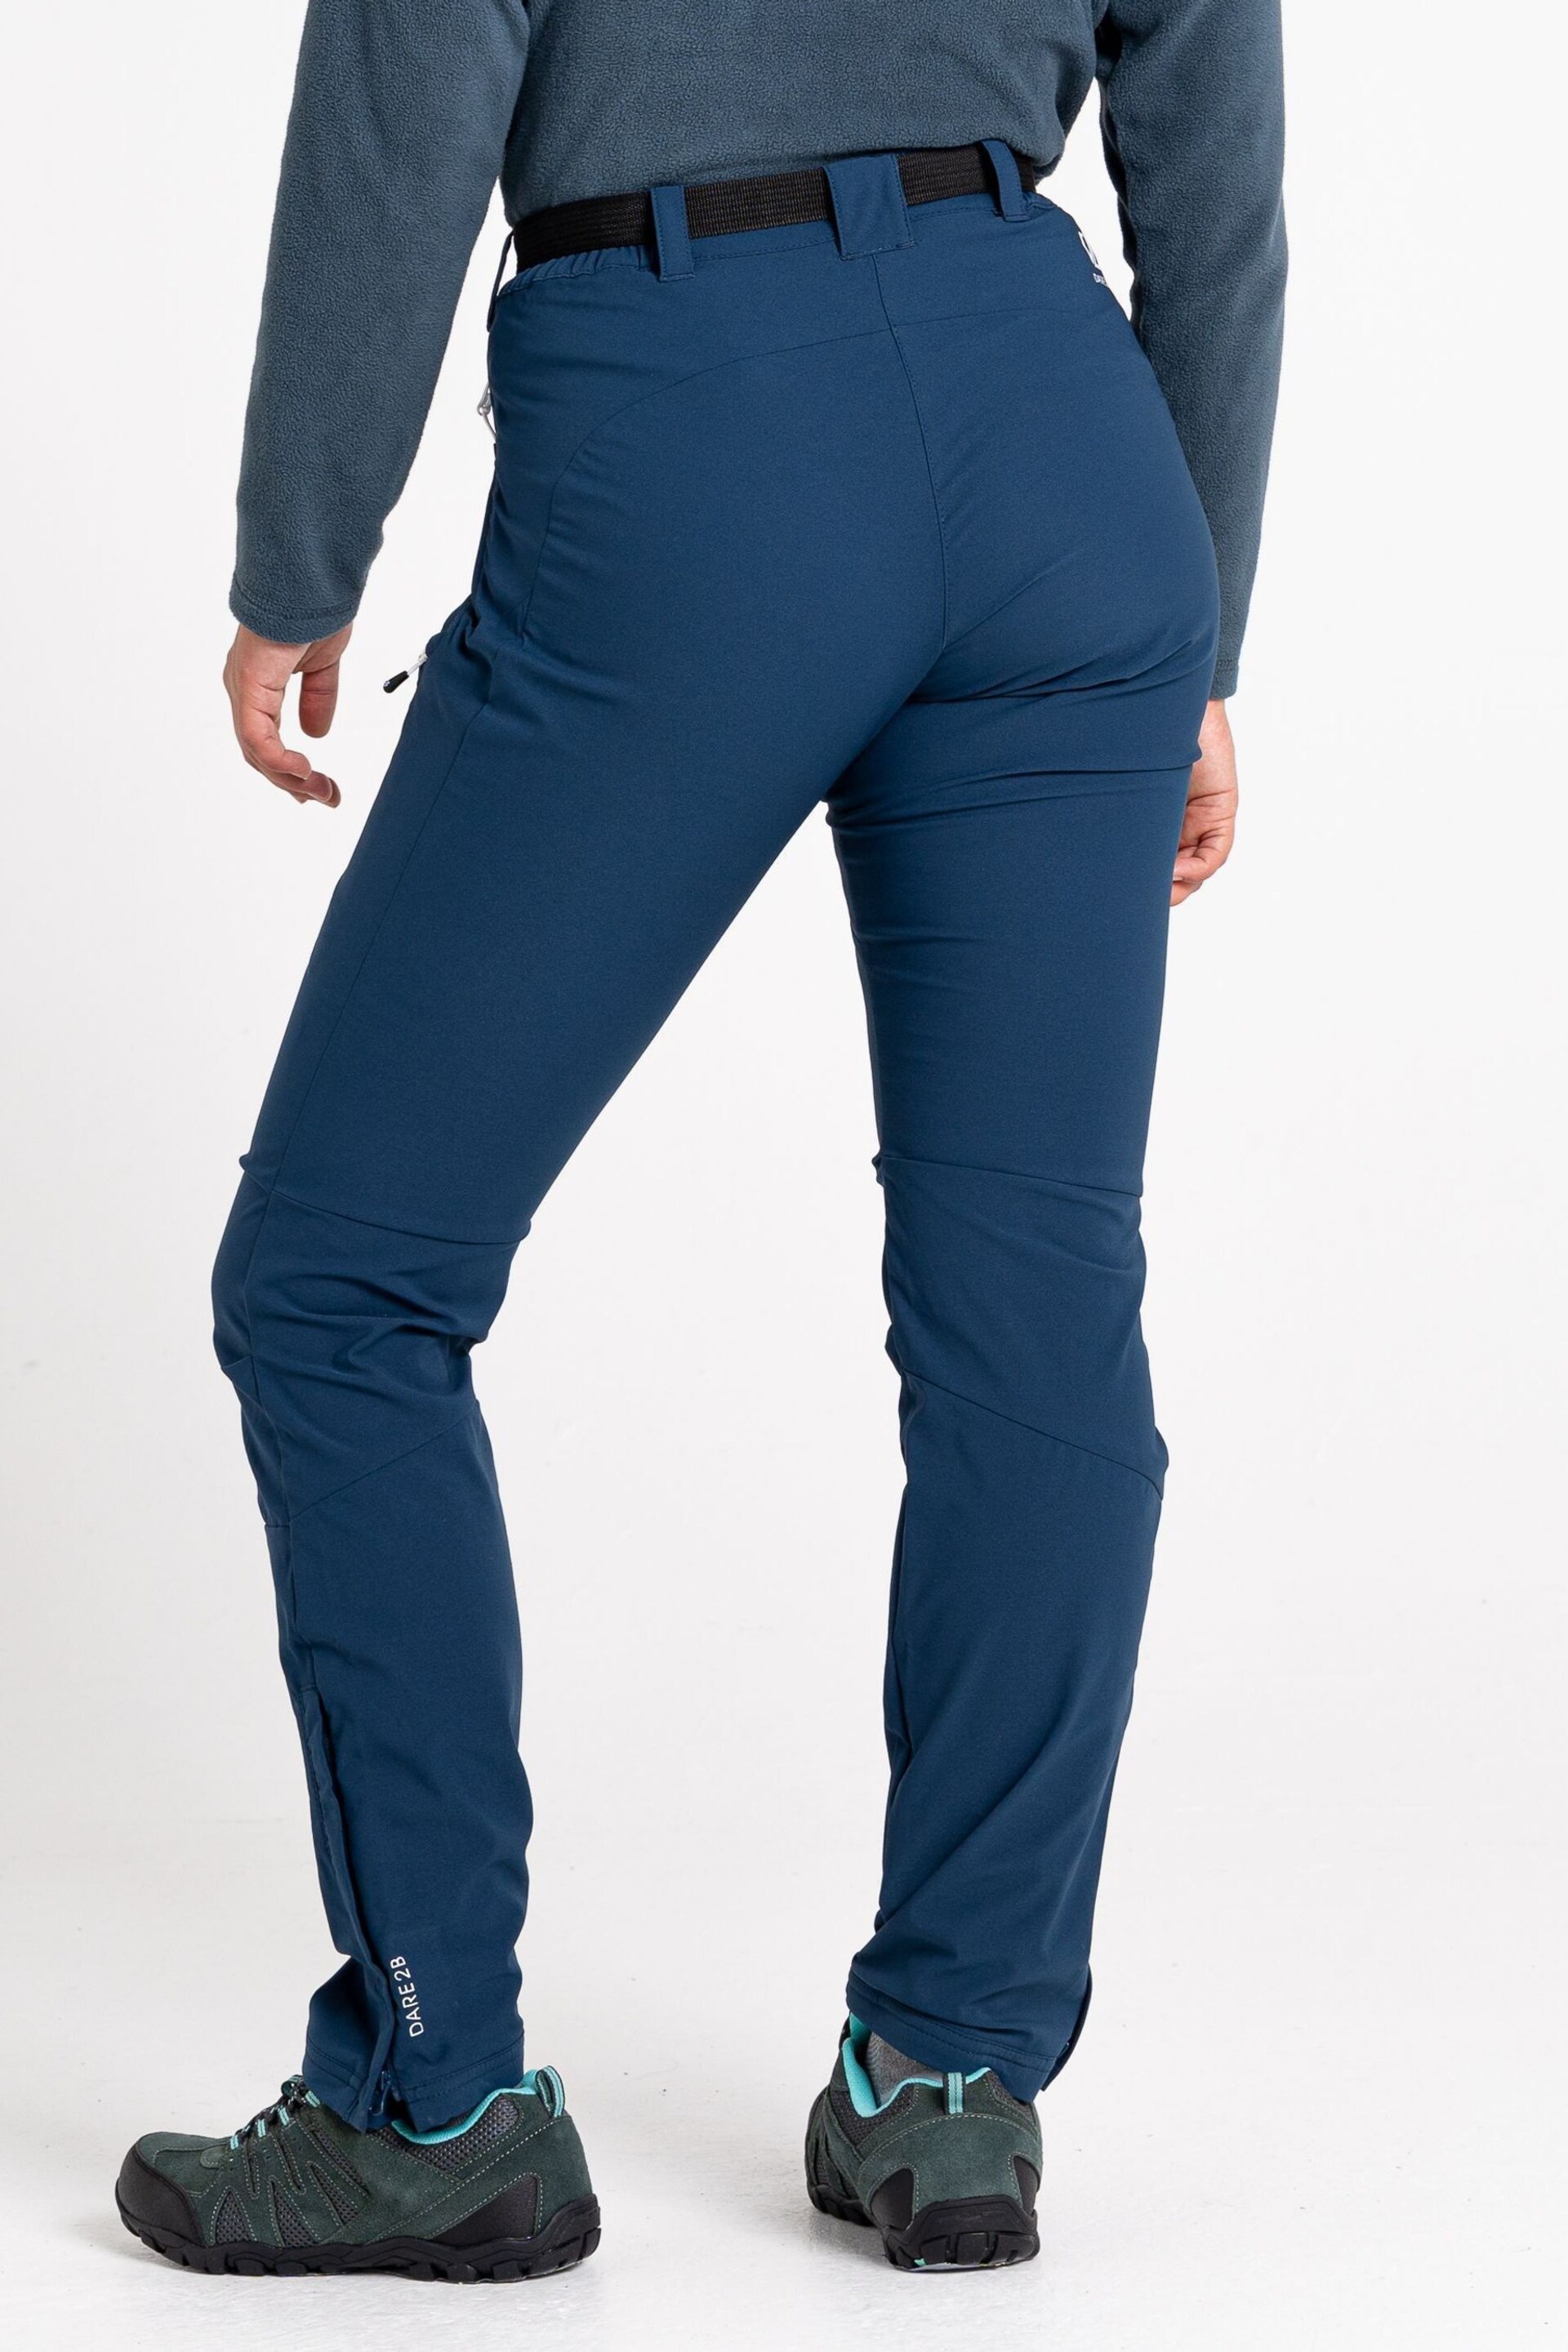 Dare 2b Blue Melodic Pro Stretch Trousers - Image 3 of 6